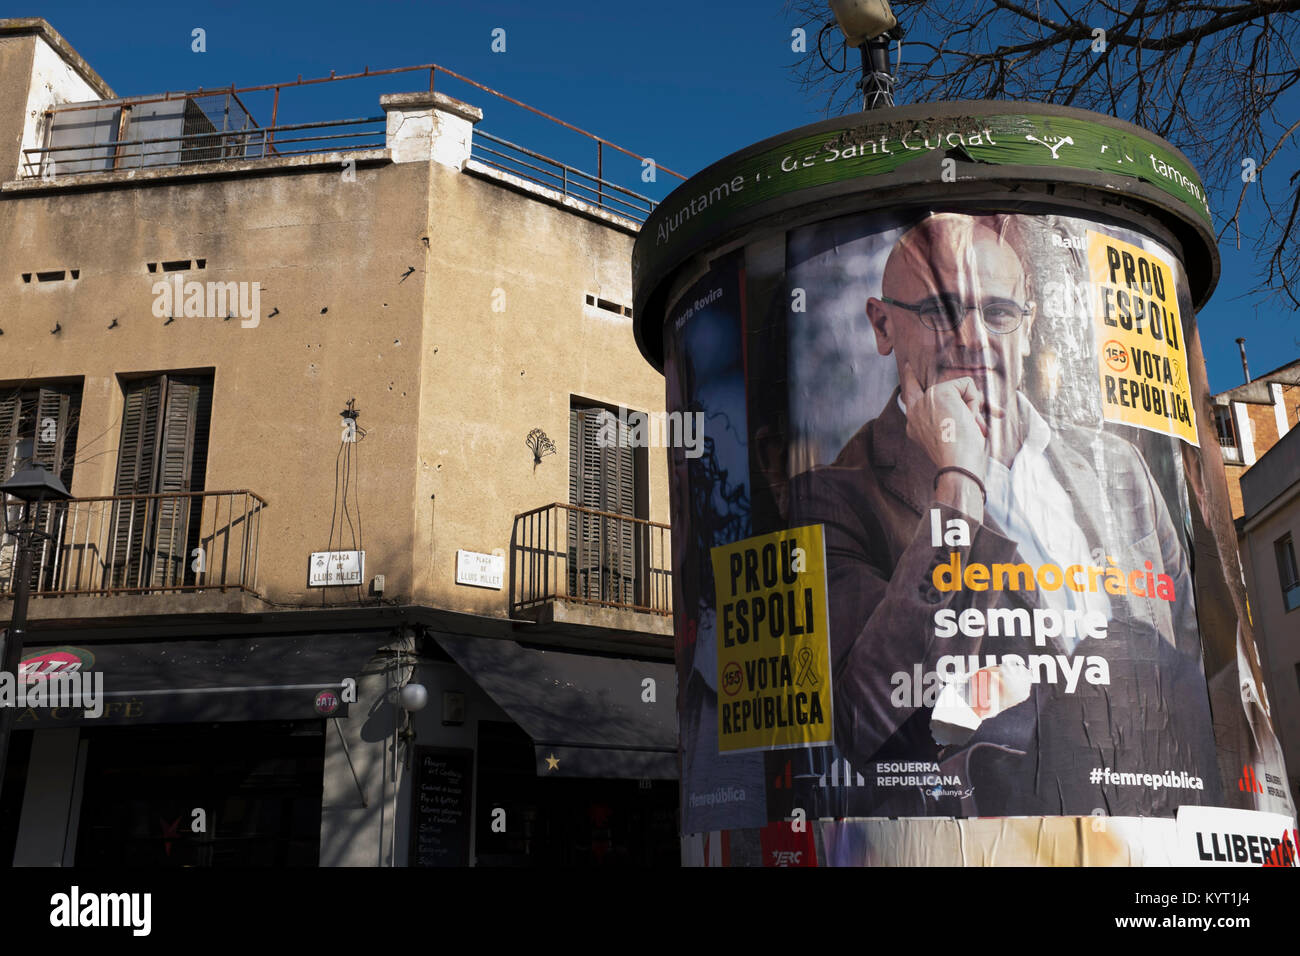 Sant Cugat del Valles - Election posters featuring local resident and Catalan foreign minister Raul Romeva, jailed following the October 1st referendu Stock Photo